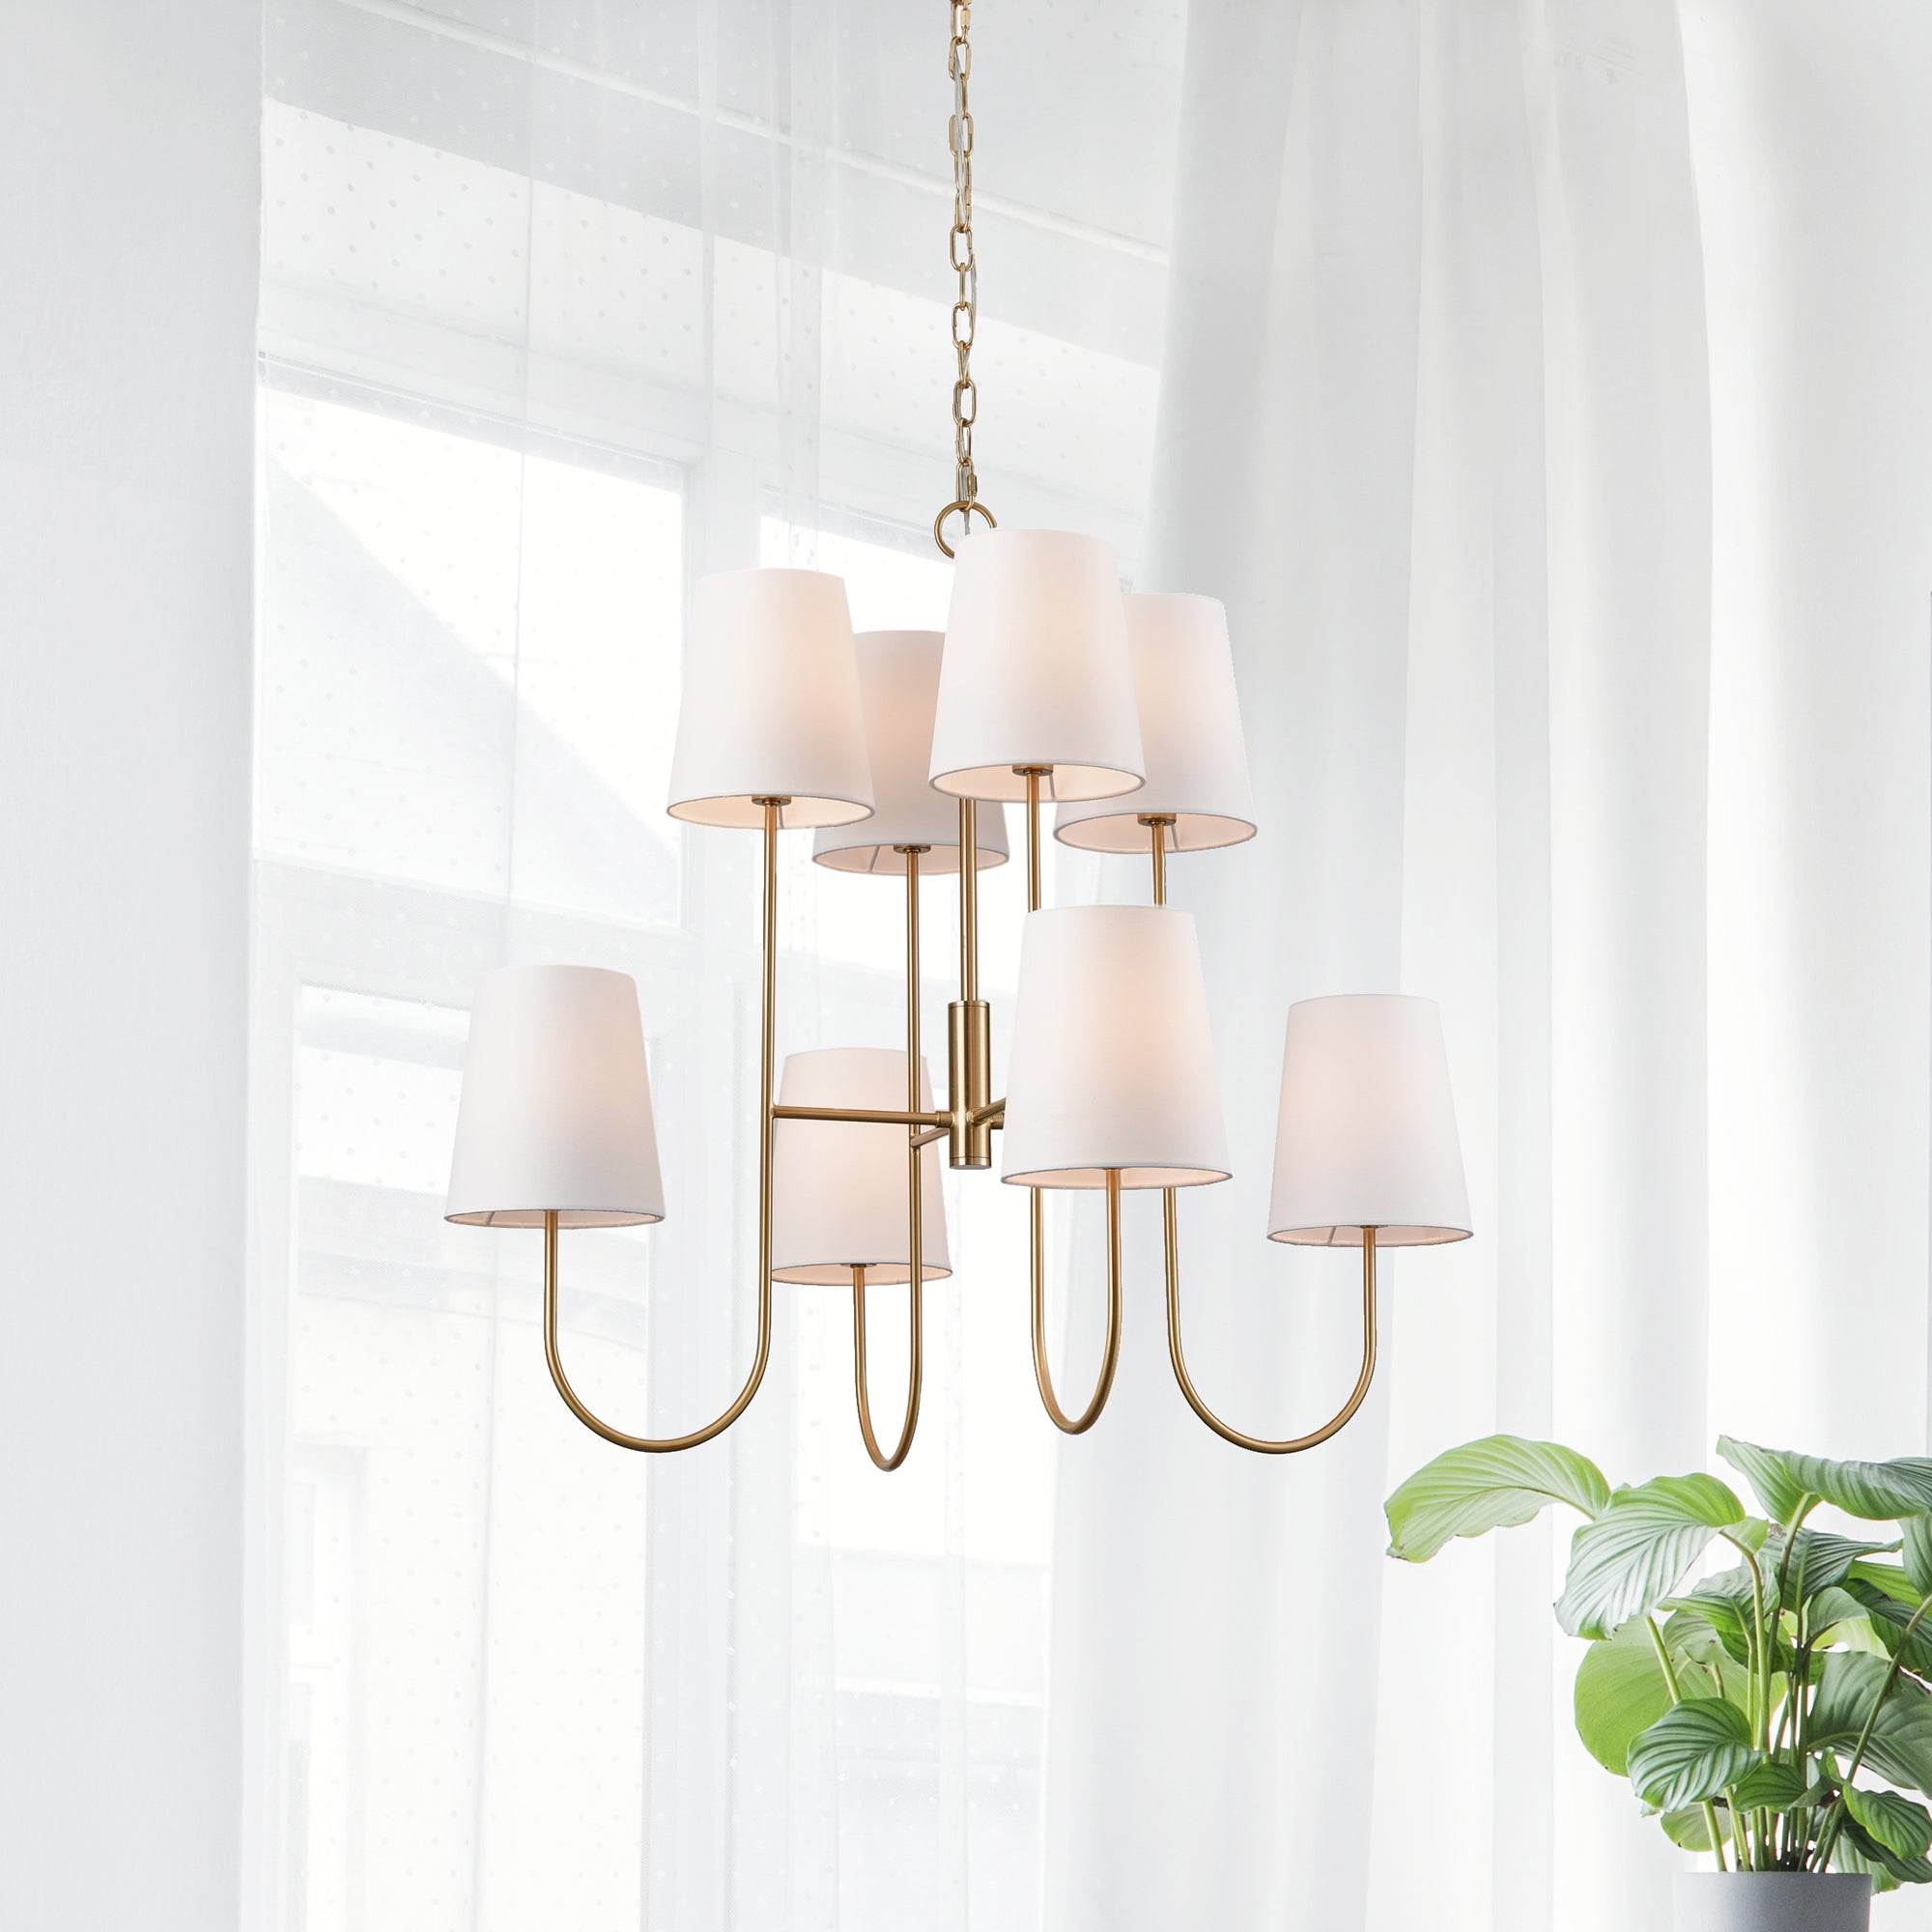 The Kinley Chandelier is a fresh take on a classic two-tiered shape. Subtle modern touches like the tapered shade and gold finish complete the look. Amethyst Home provides interior design, new construction, custom furniture, and area rugs in the Scottsdale metro area.